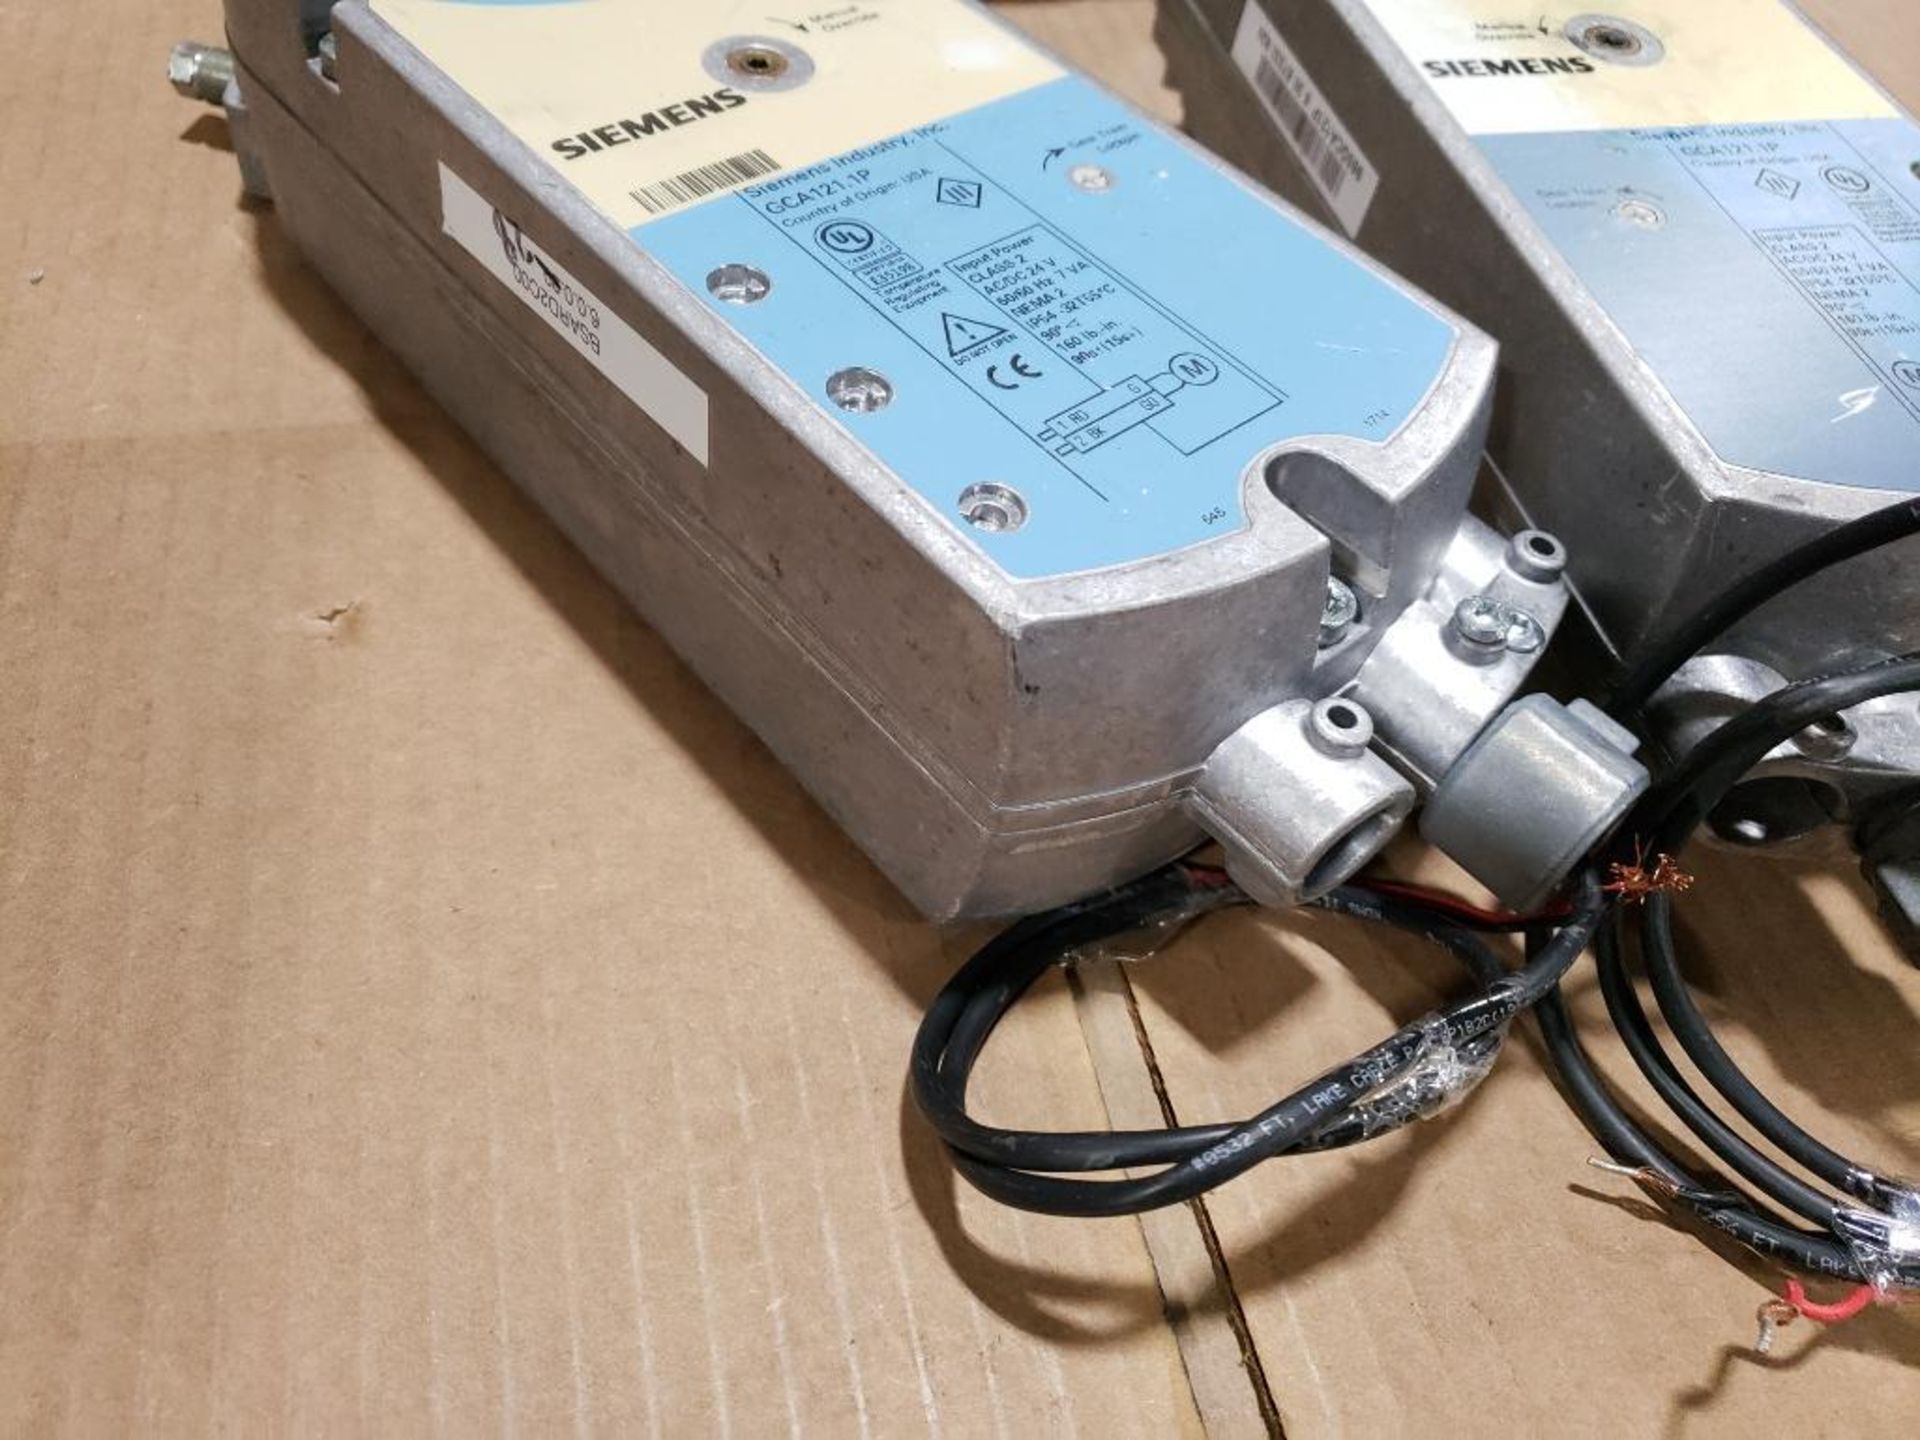 Qty 2 - Siemens actuator. Part number GCA121-1P. - Image 5 of 5